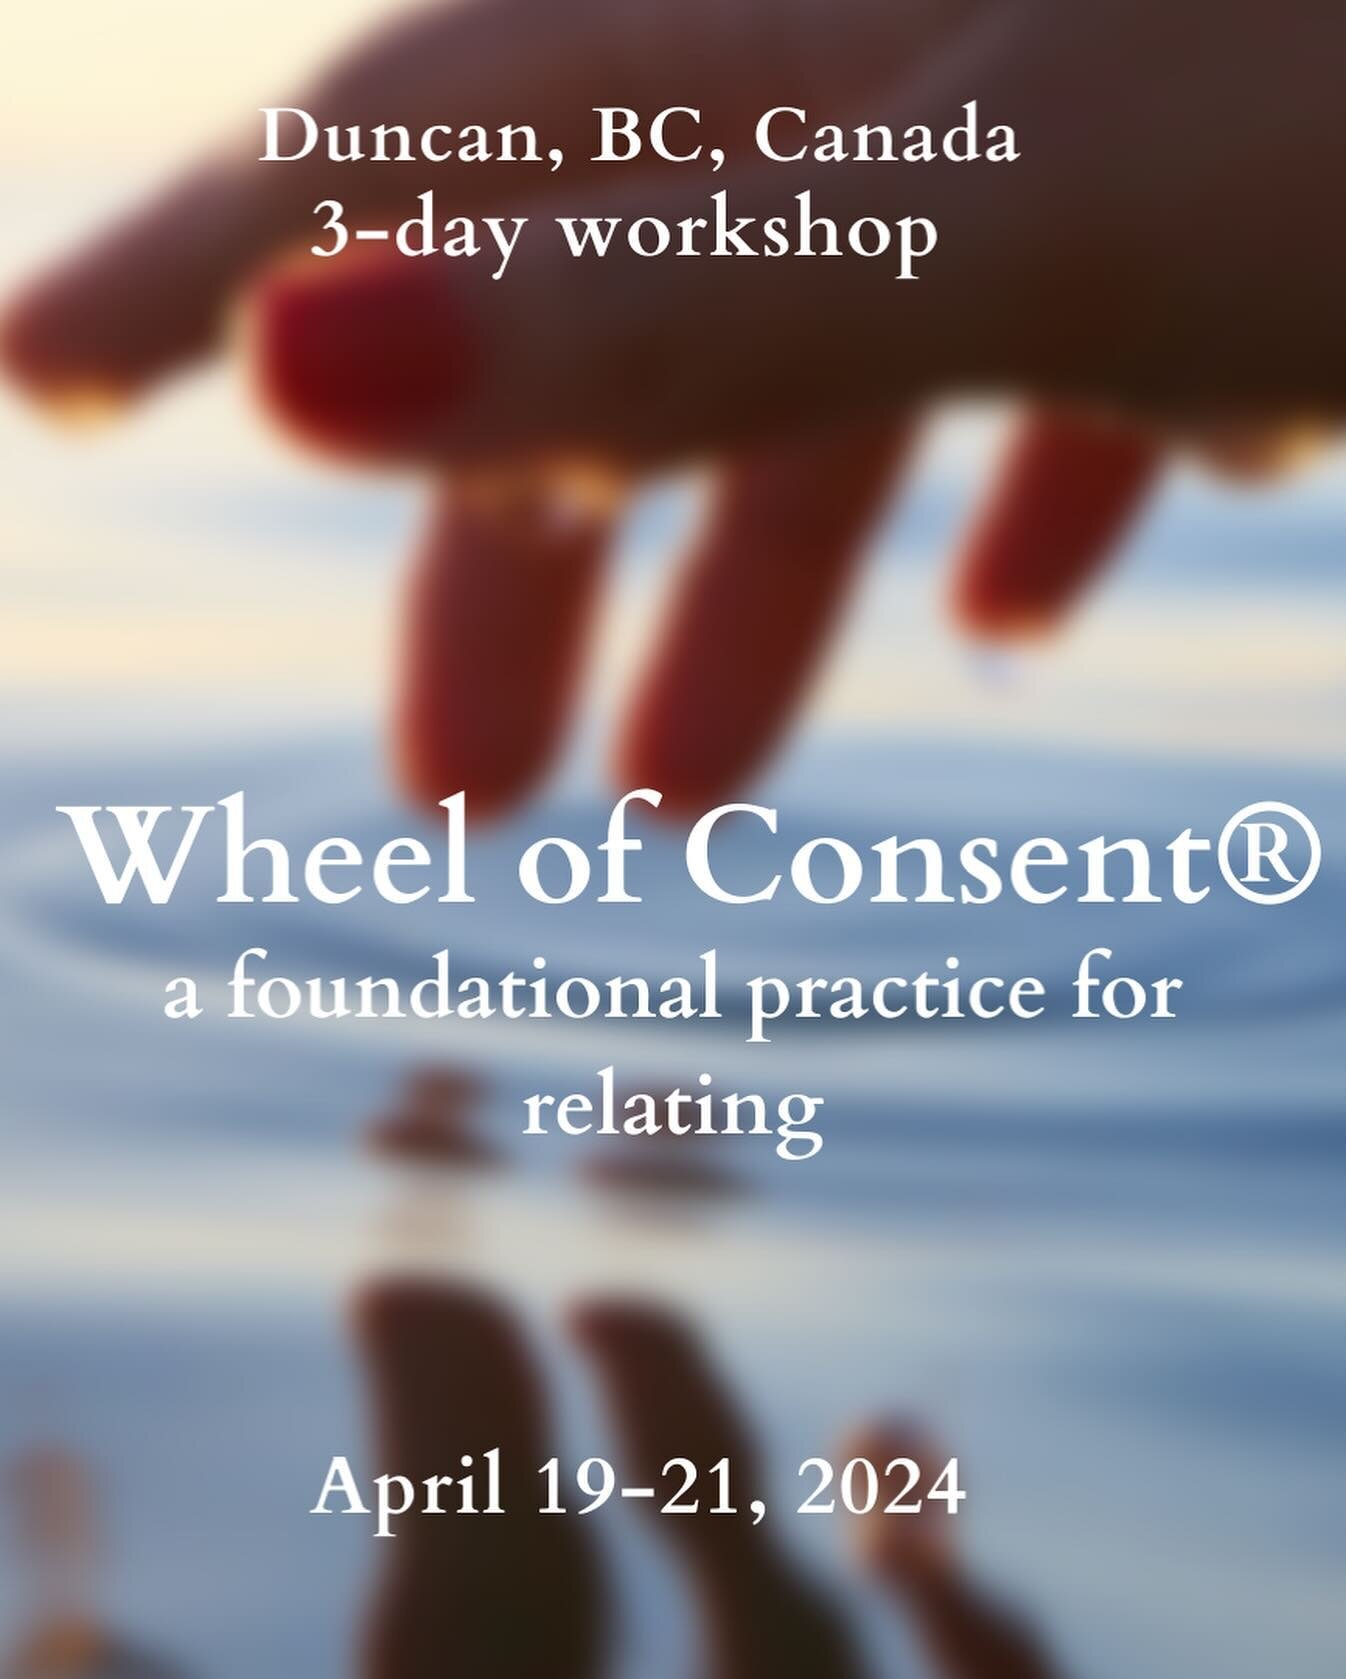 ✨ Duncan April 19-21 ✨

Thrilled to be offering a 3-day @thewheelofconsent workshop on Vancouver Island this spring.

The practice is simple, subtle, and profound.

You will come away from this offering with a deepened ability to navigate consent in 